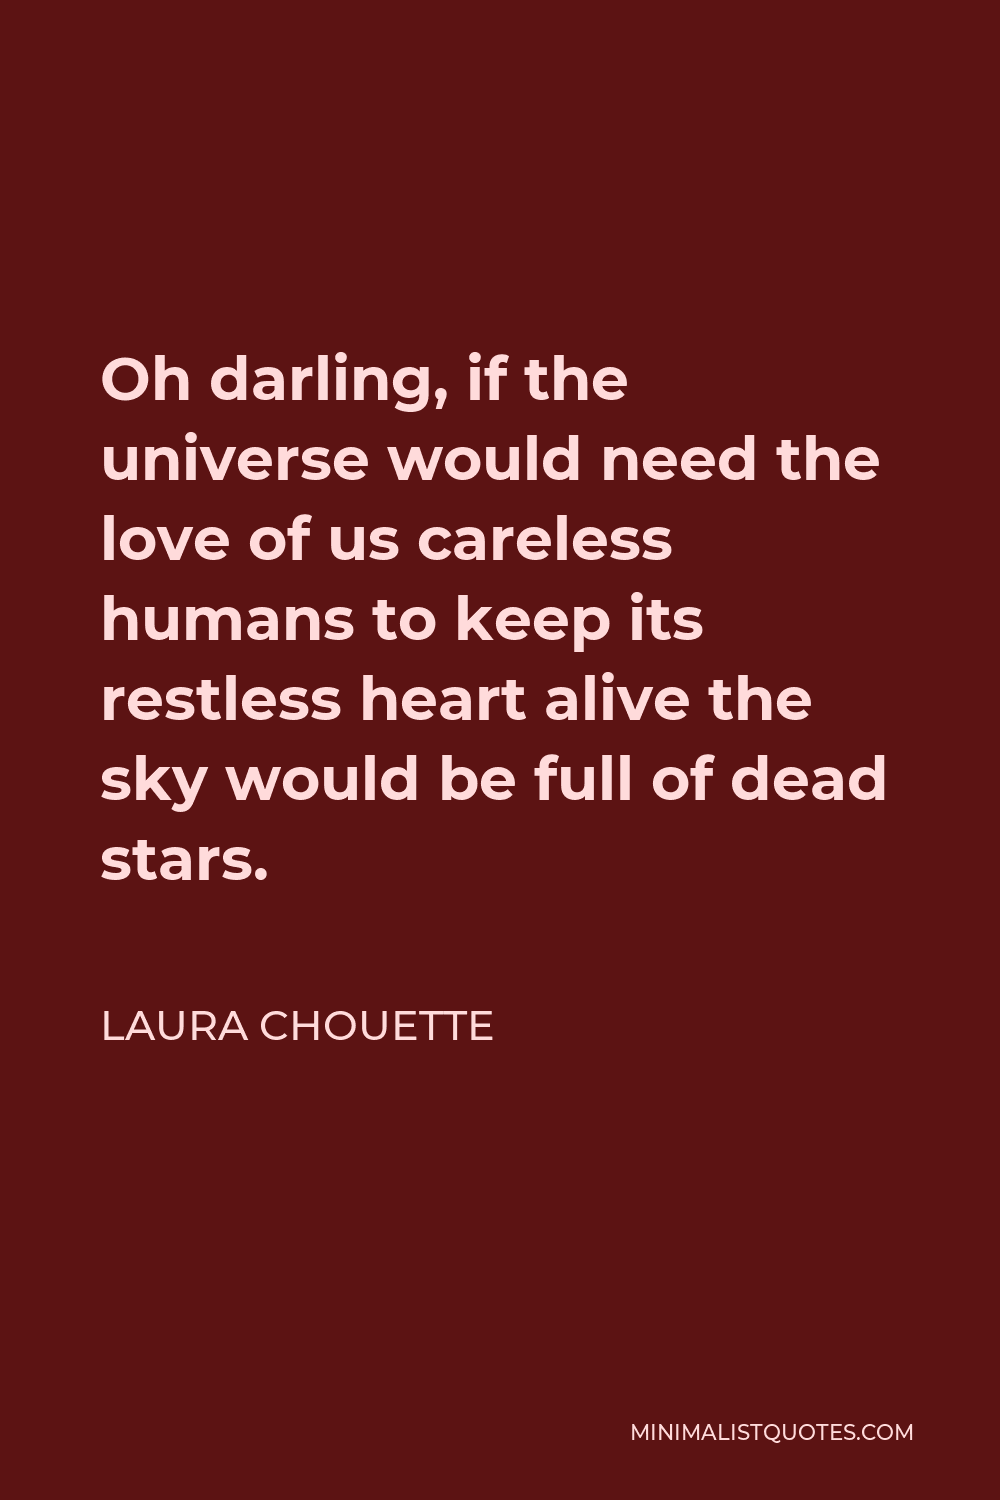 Laura Chouette Quote - Oh darling, if the universe would need the love of us careless humans to keep its restless heart alive the sky would be full of dead stars.